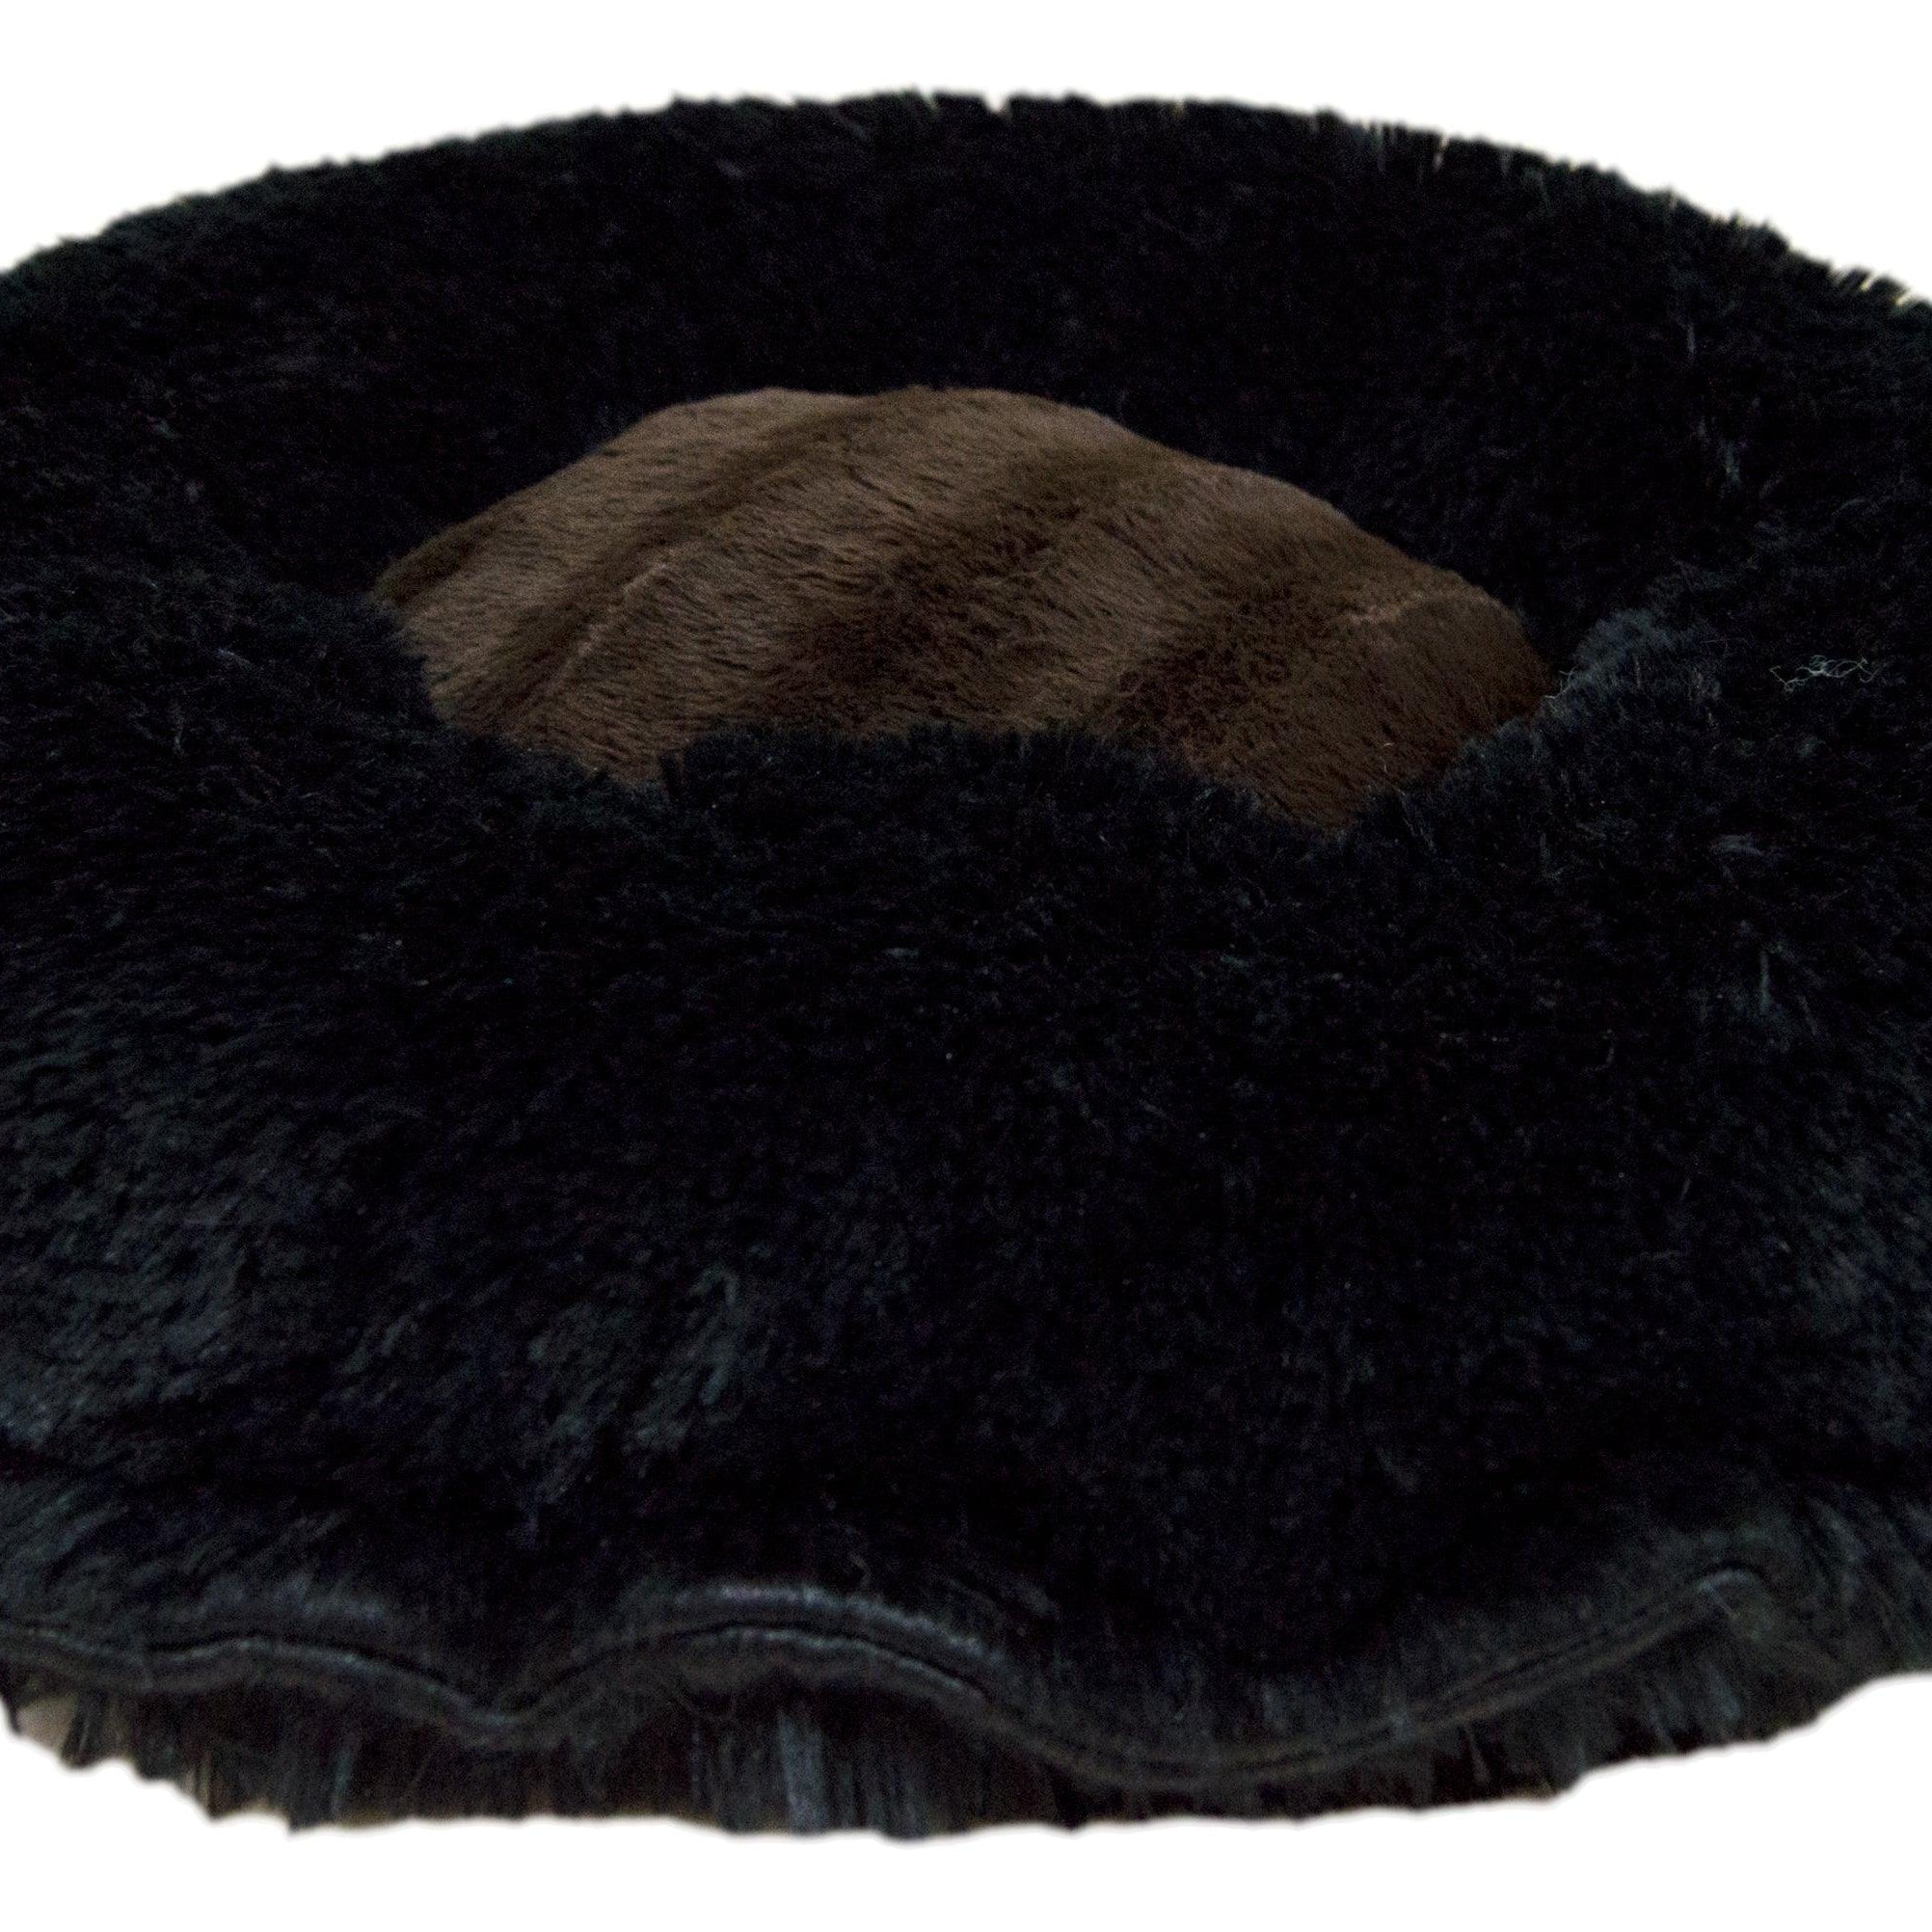 Lily Pod - Black Bear and Godiva Brown Patch - Rocky & Maggie's Pet Boutique and Salon